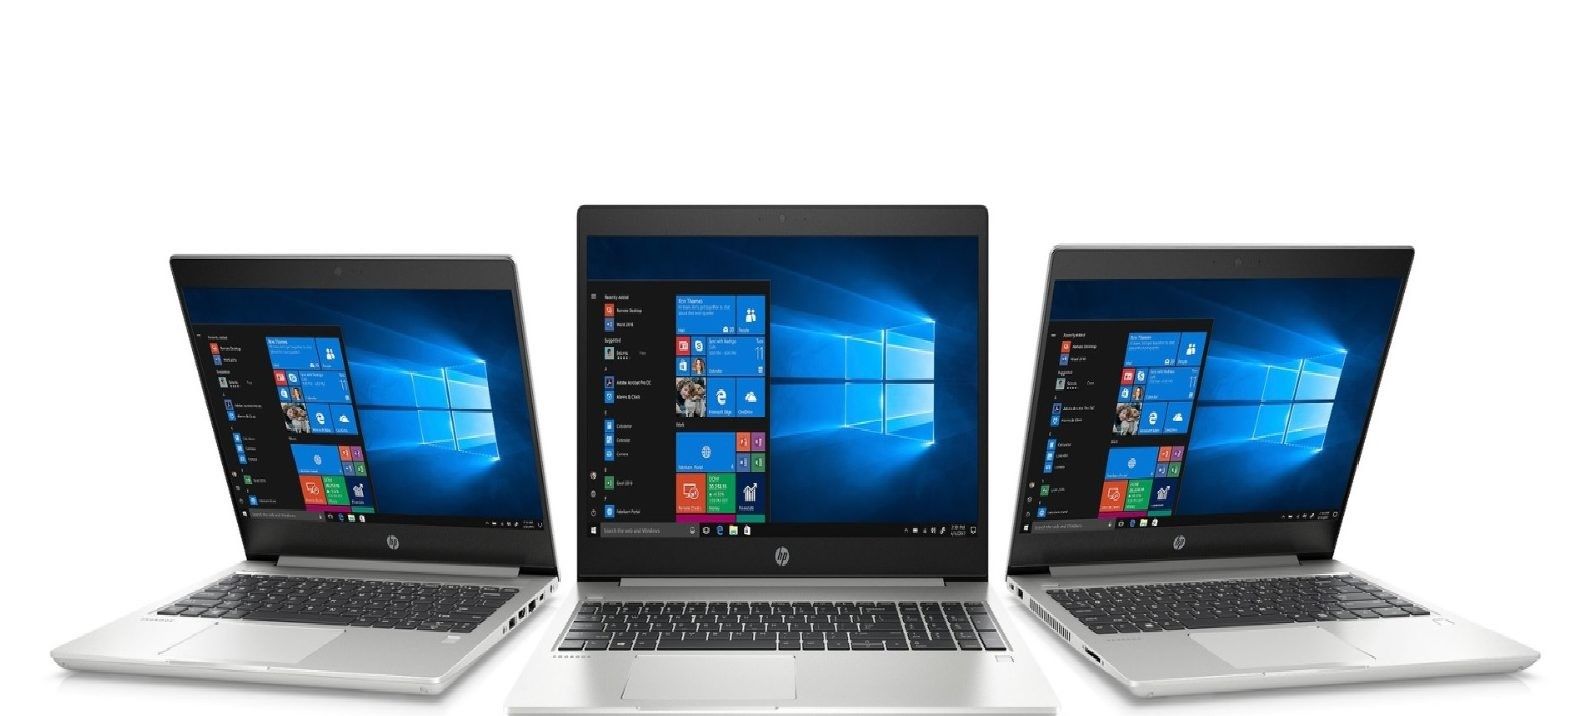 HP ProBook 430, 440, 450 G6 Notebook Review: An Excellent Choice for Professionals